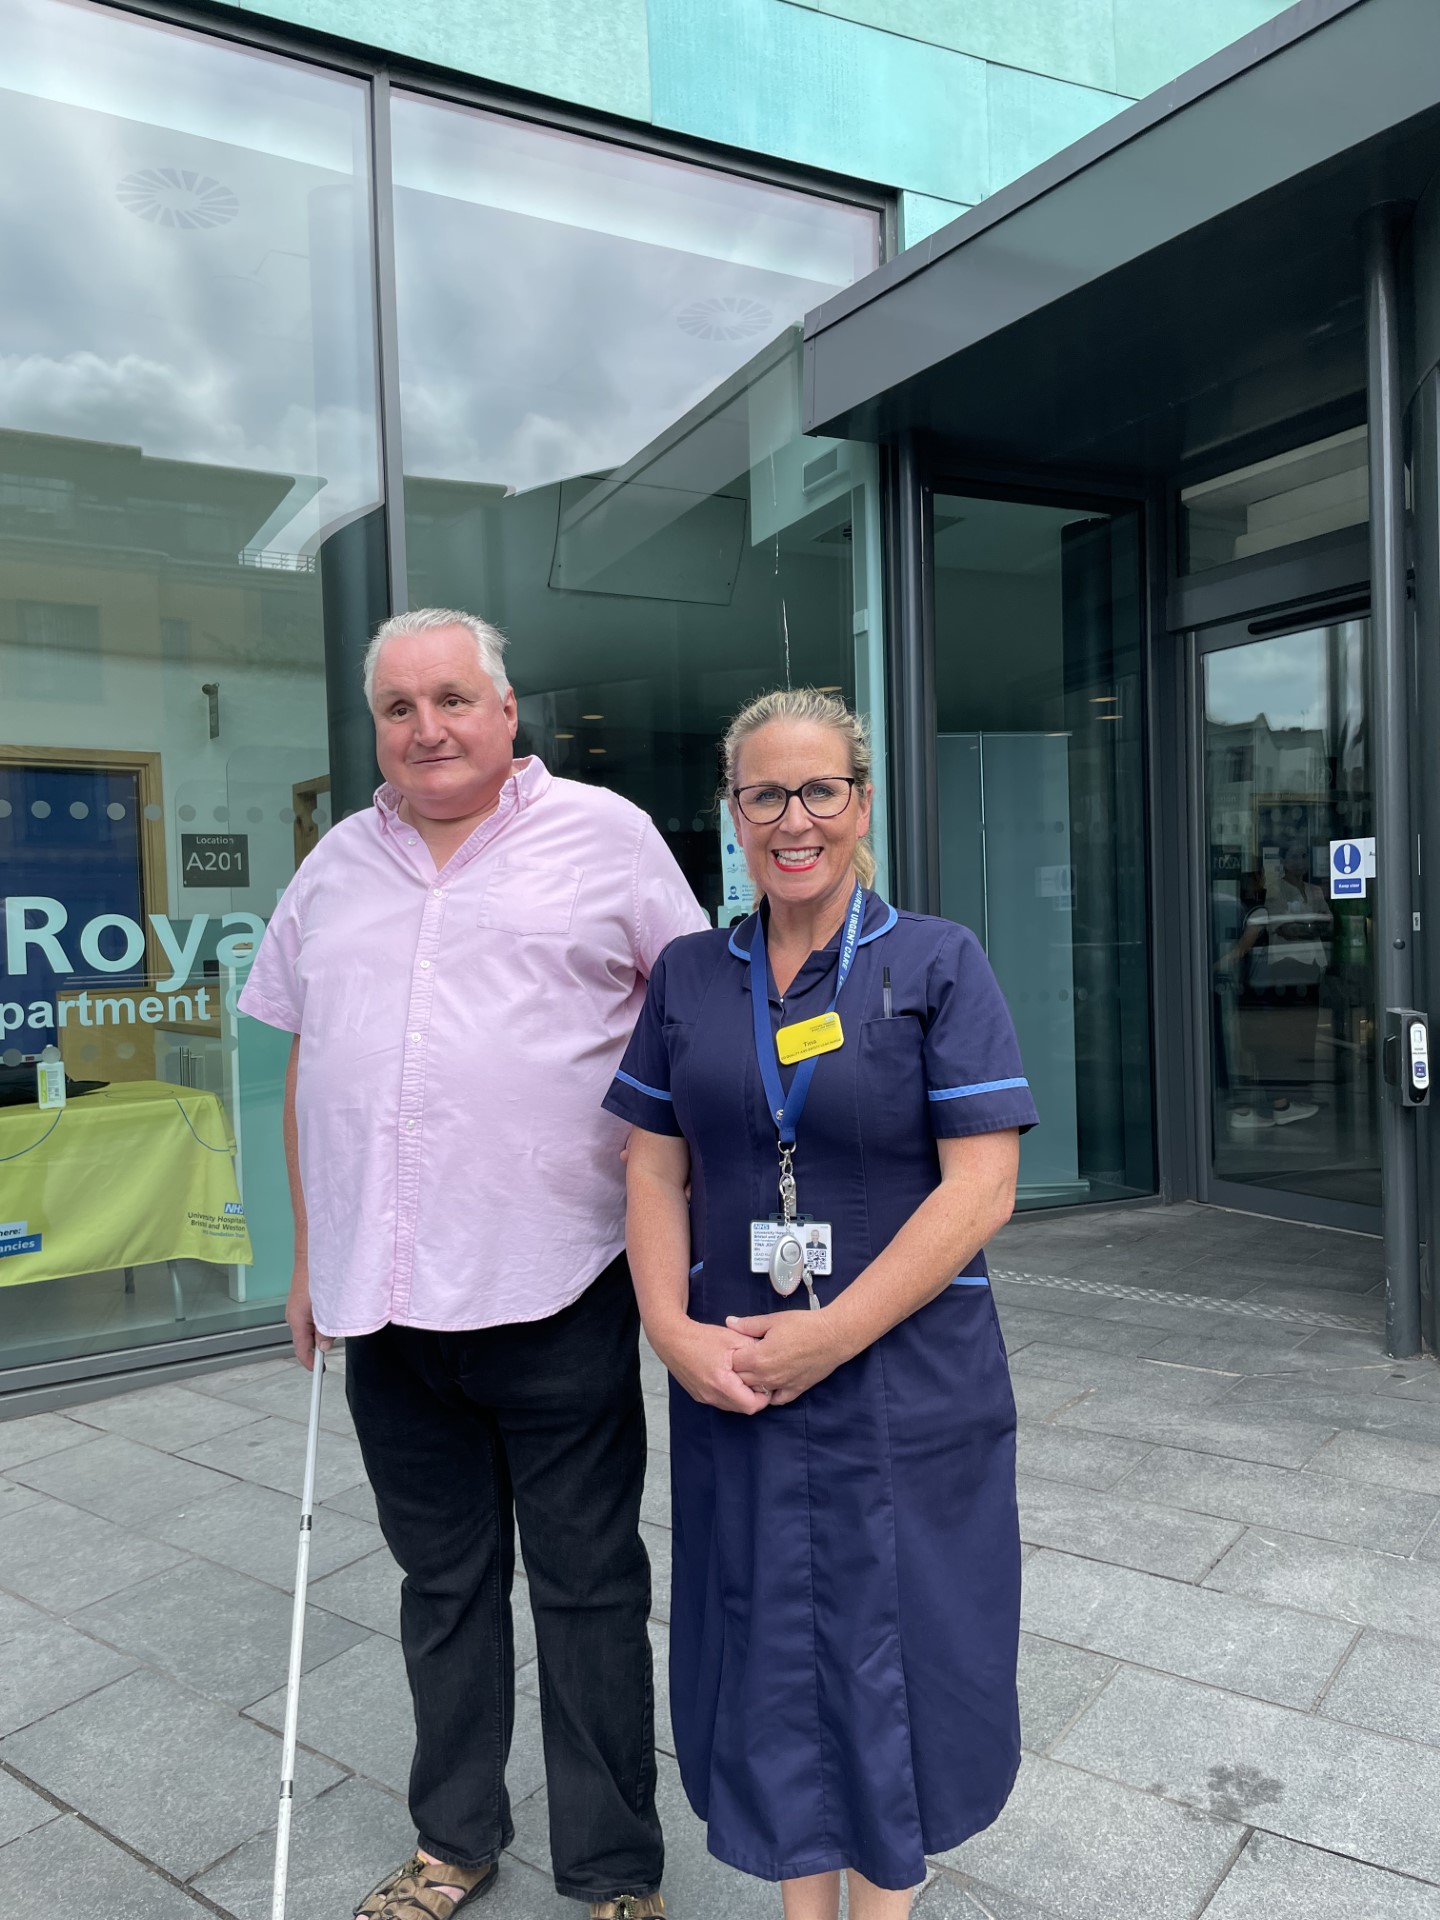 Alun Davies, Engagement Manager for South West England, stood with Tina Johnson, Lead nurse for the BRI Emergency Department and the Medical Assessment zone. They are stood outside the entrance to the emergency department.